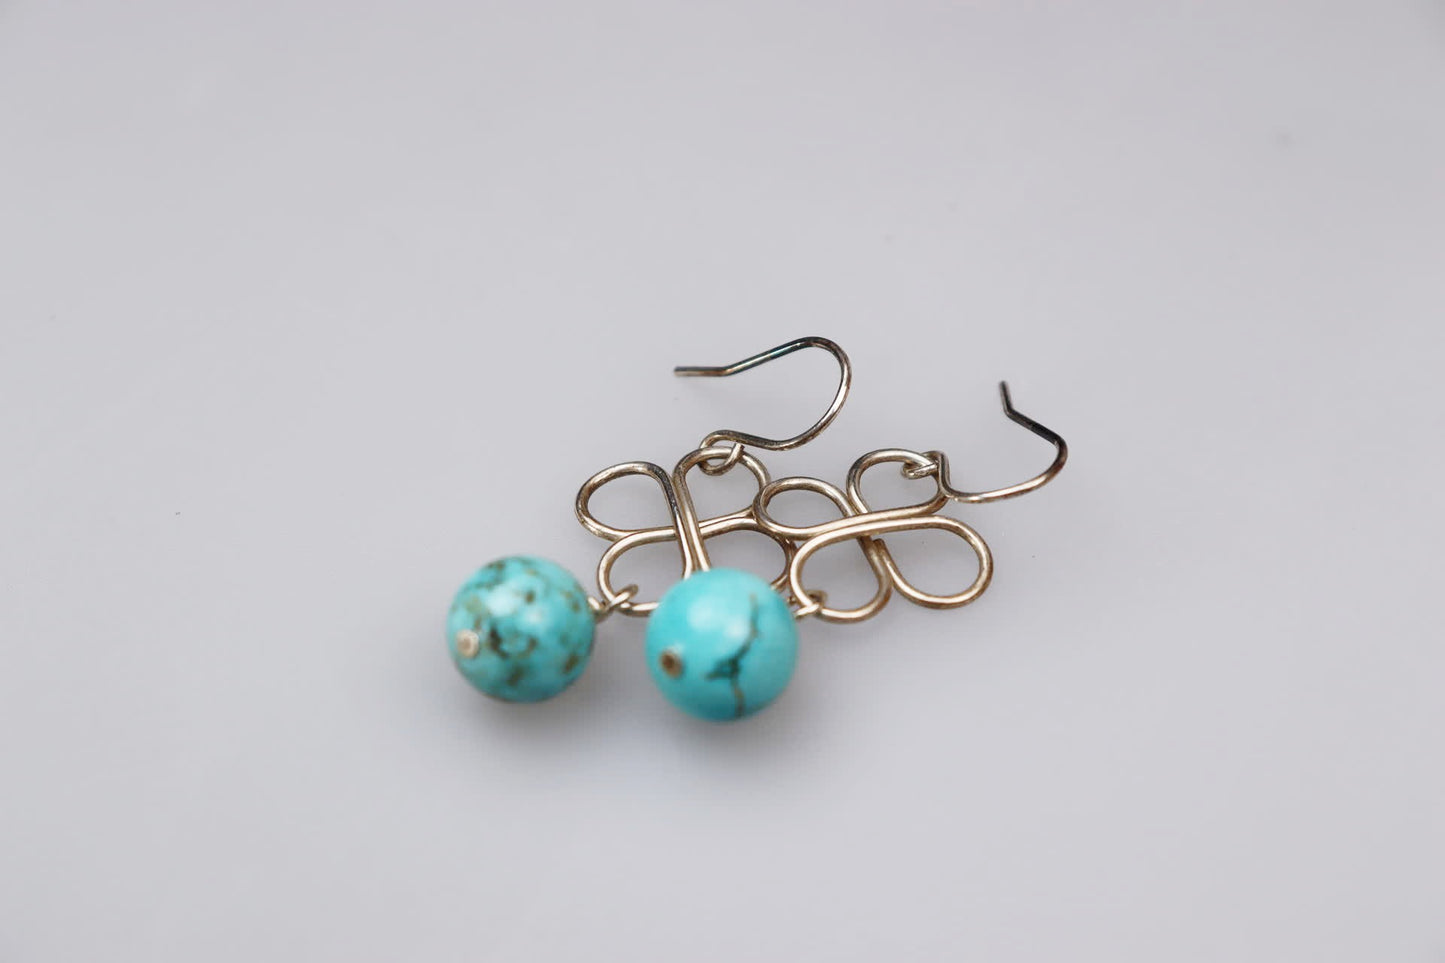 Clover Sterling Silver and Turquoise Earrings